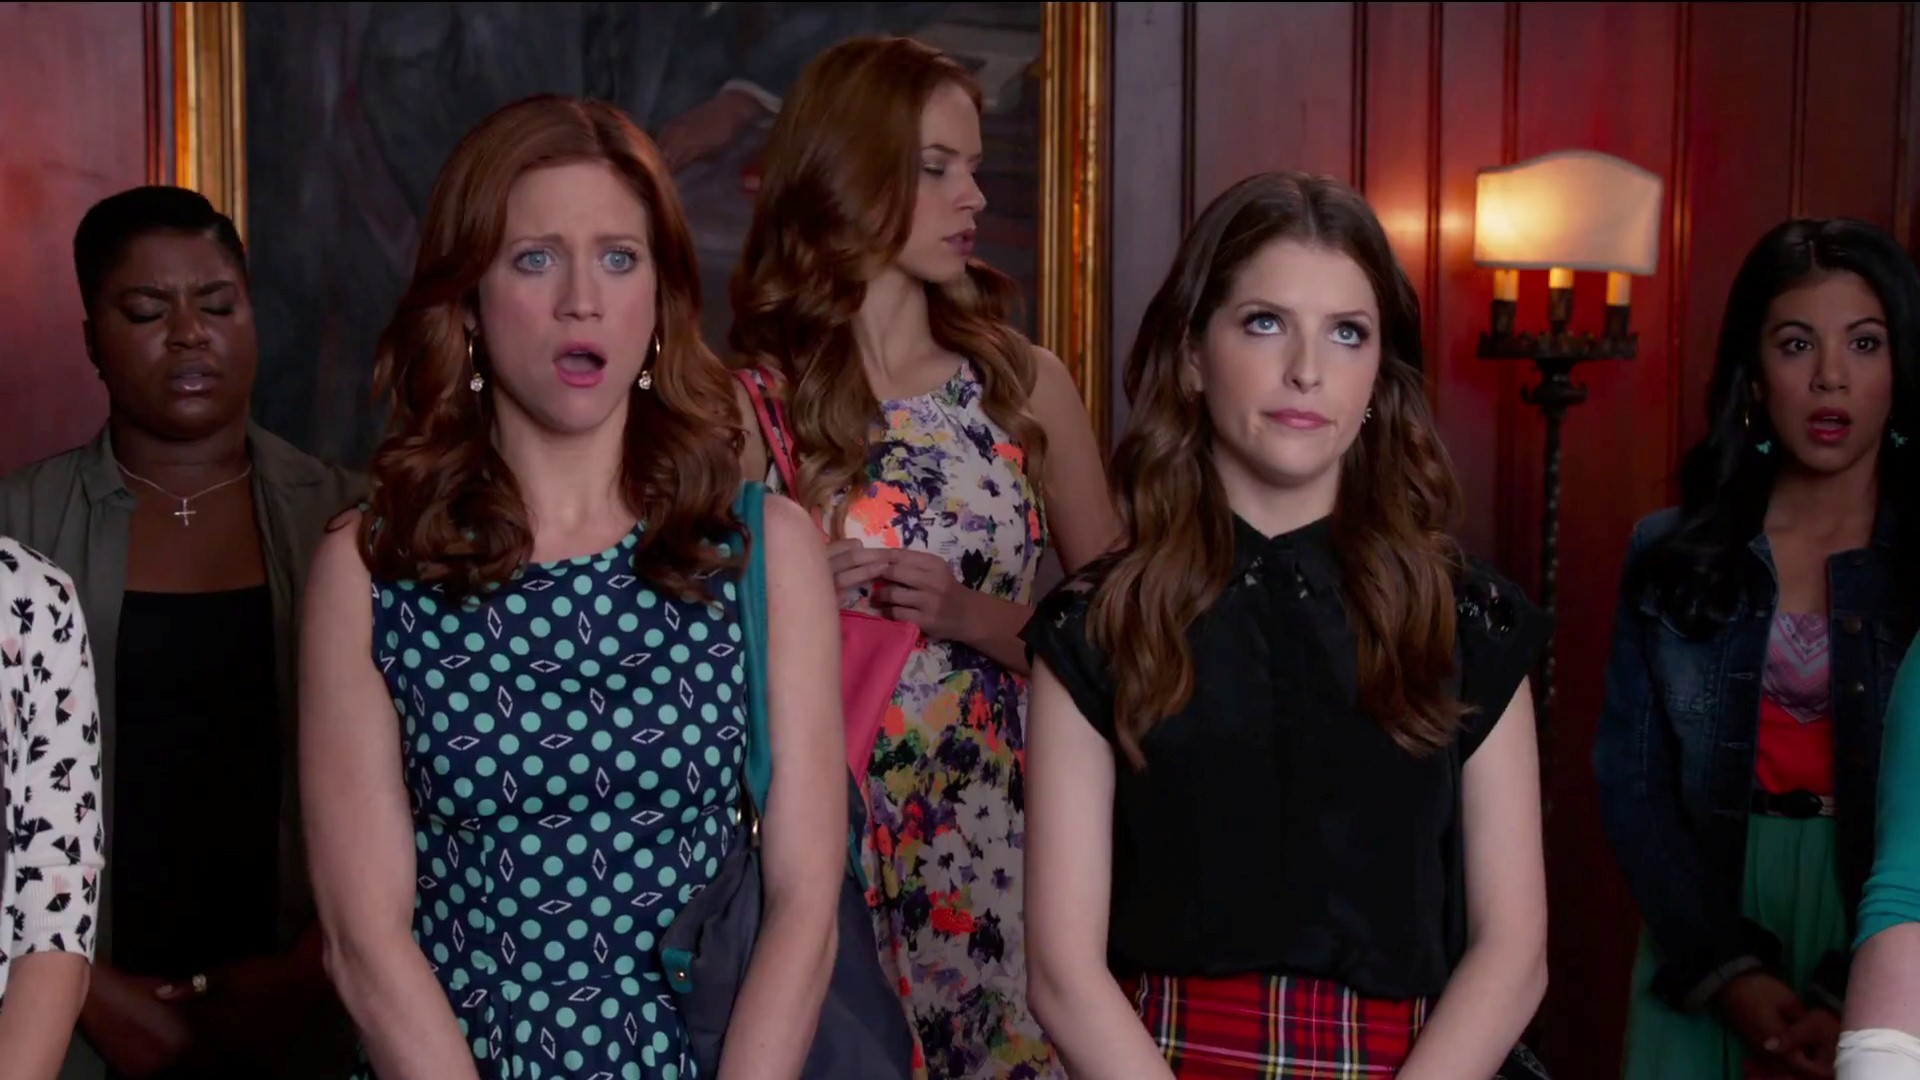 1920x1080 Anna Kendrick in Pitch Perfect 2 Latest Hollywood Film Wallpaper